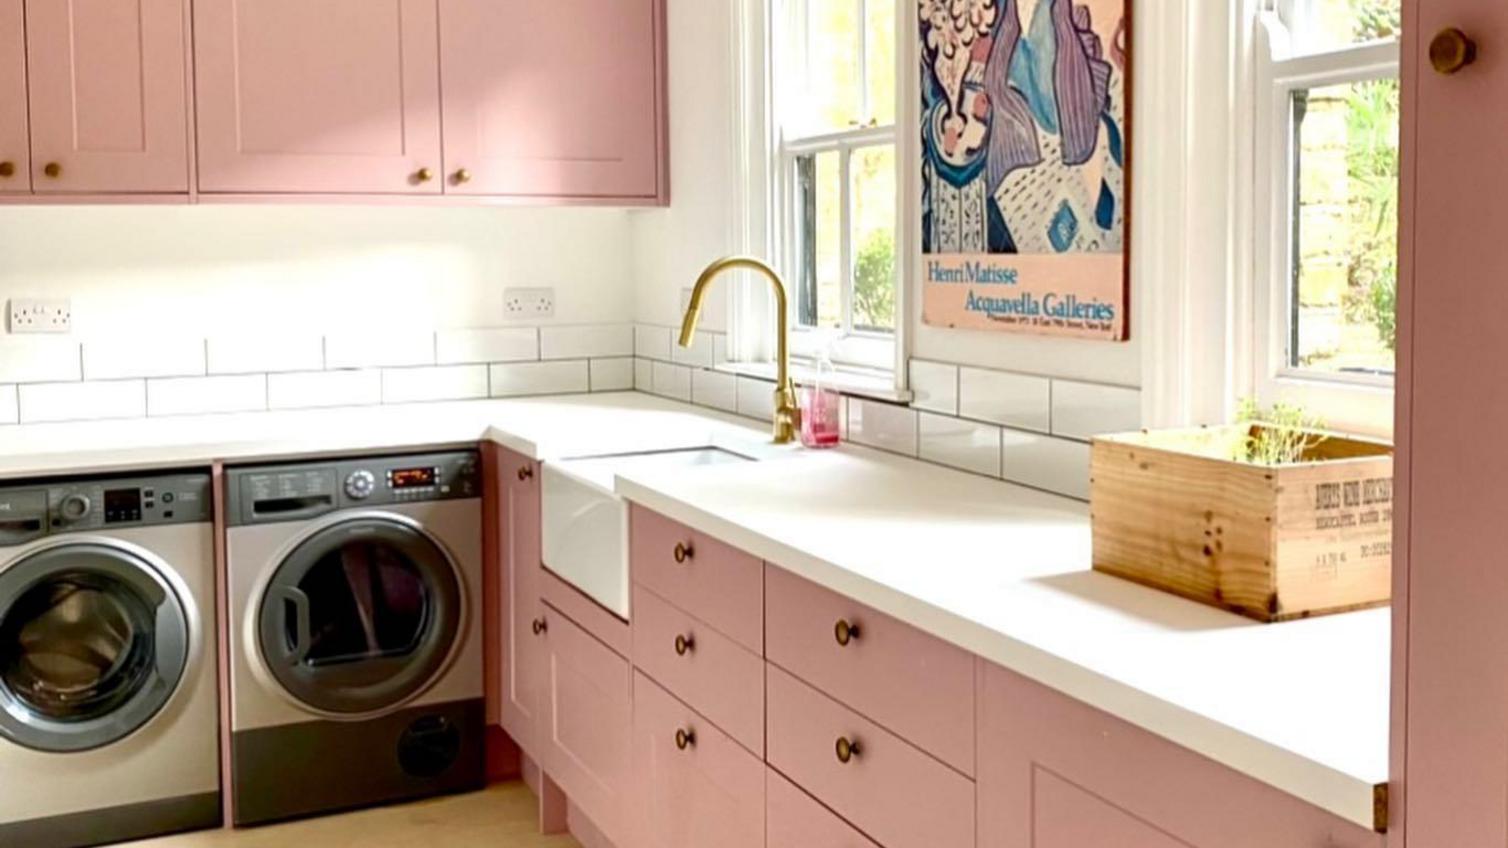 Pink shaker kitchen design in an l-shape, with brass knob handles, white worktops, washer appliances, and a gold tap.